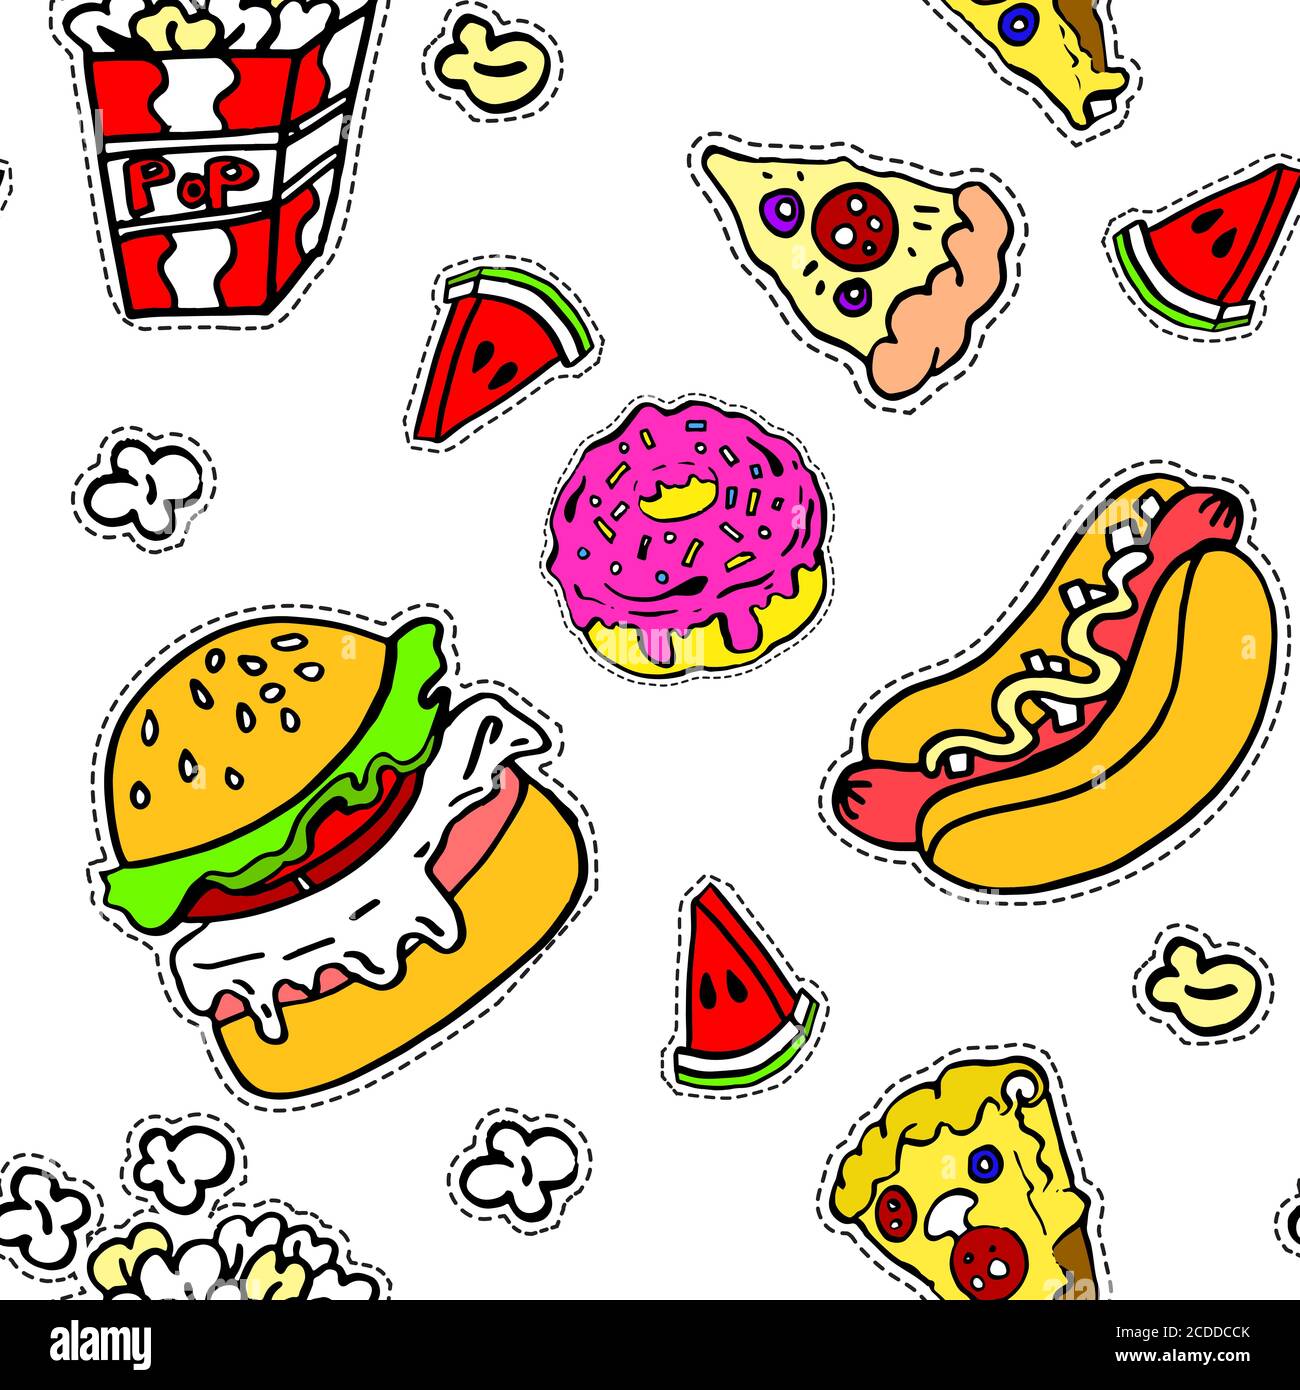 Junk food burgers and hot dogs seamless pattern Stock Vector